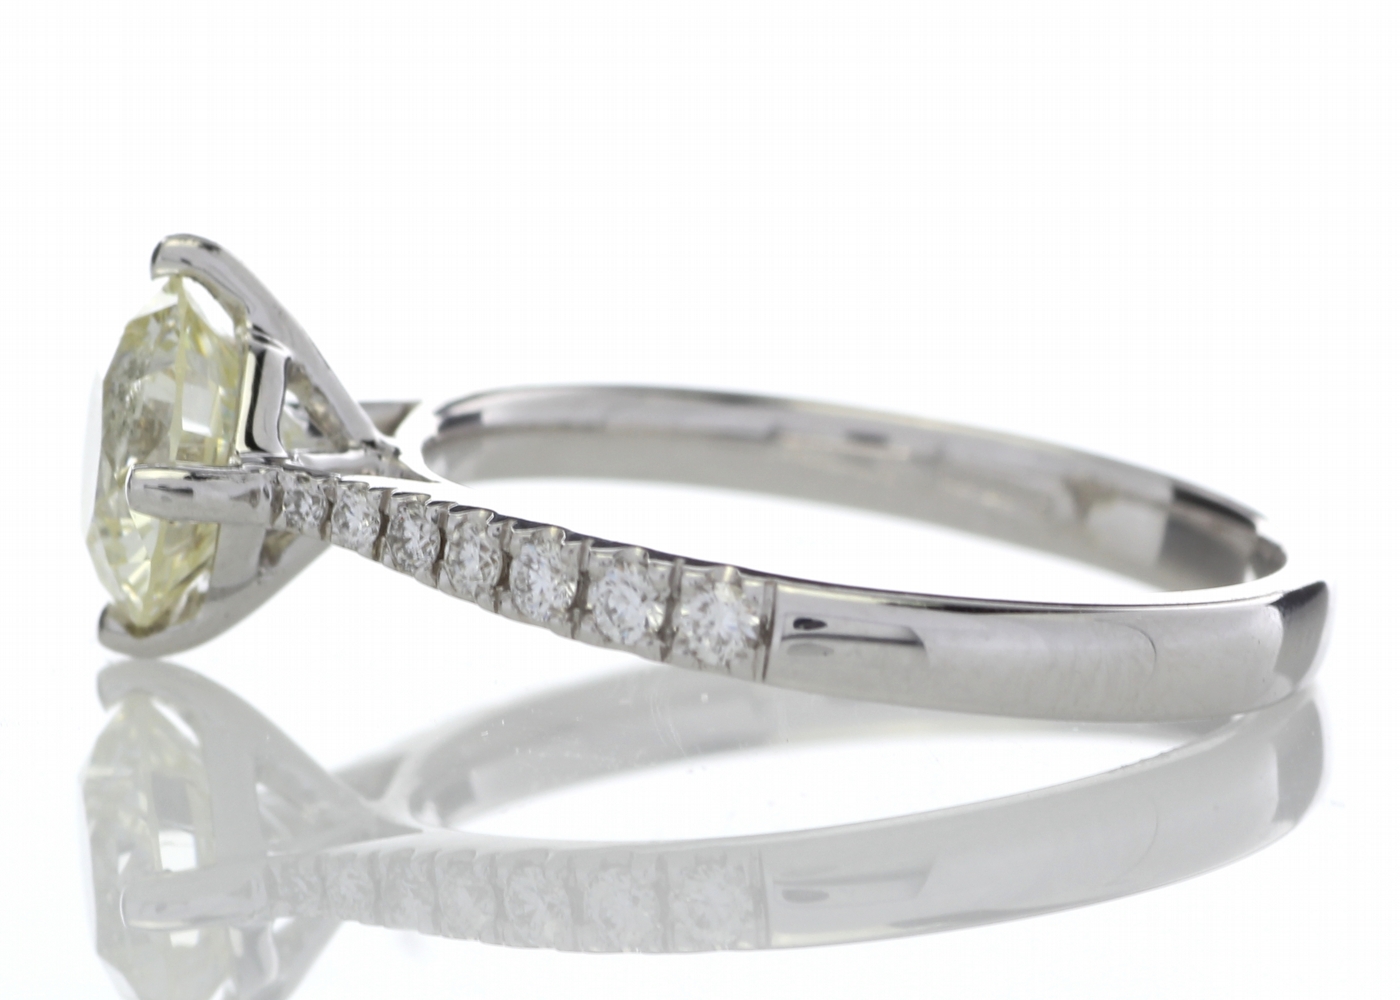 18ct White Gold Solitaire Diamond Ring With Stone Set Shoulders (1.15) 1.30 Carats - Image 3 of 5